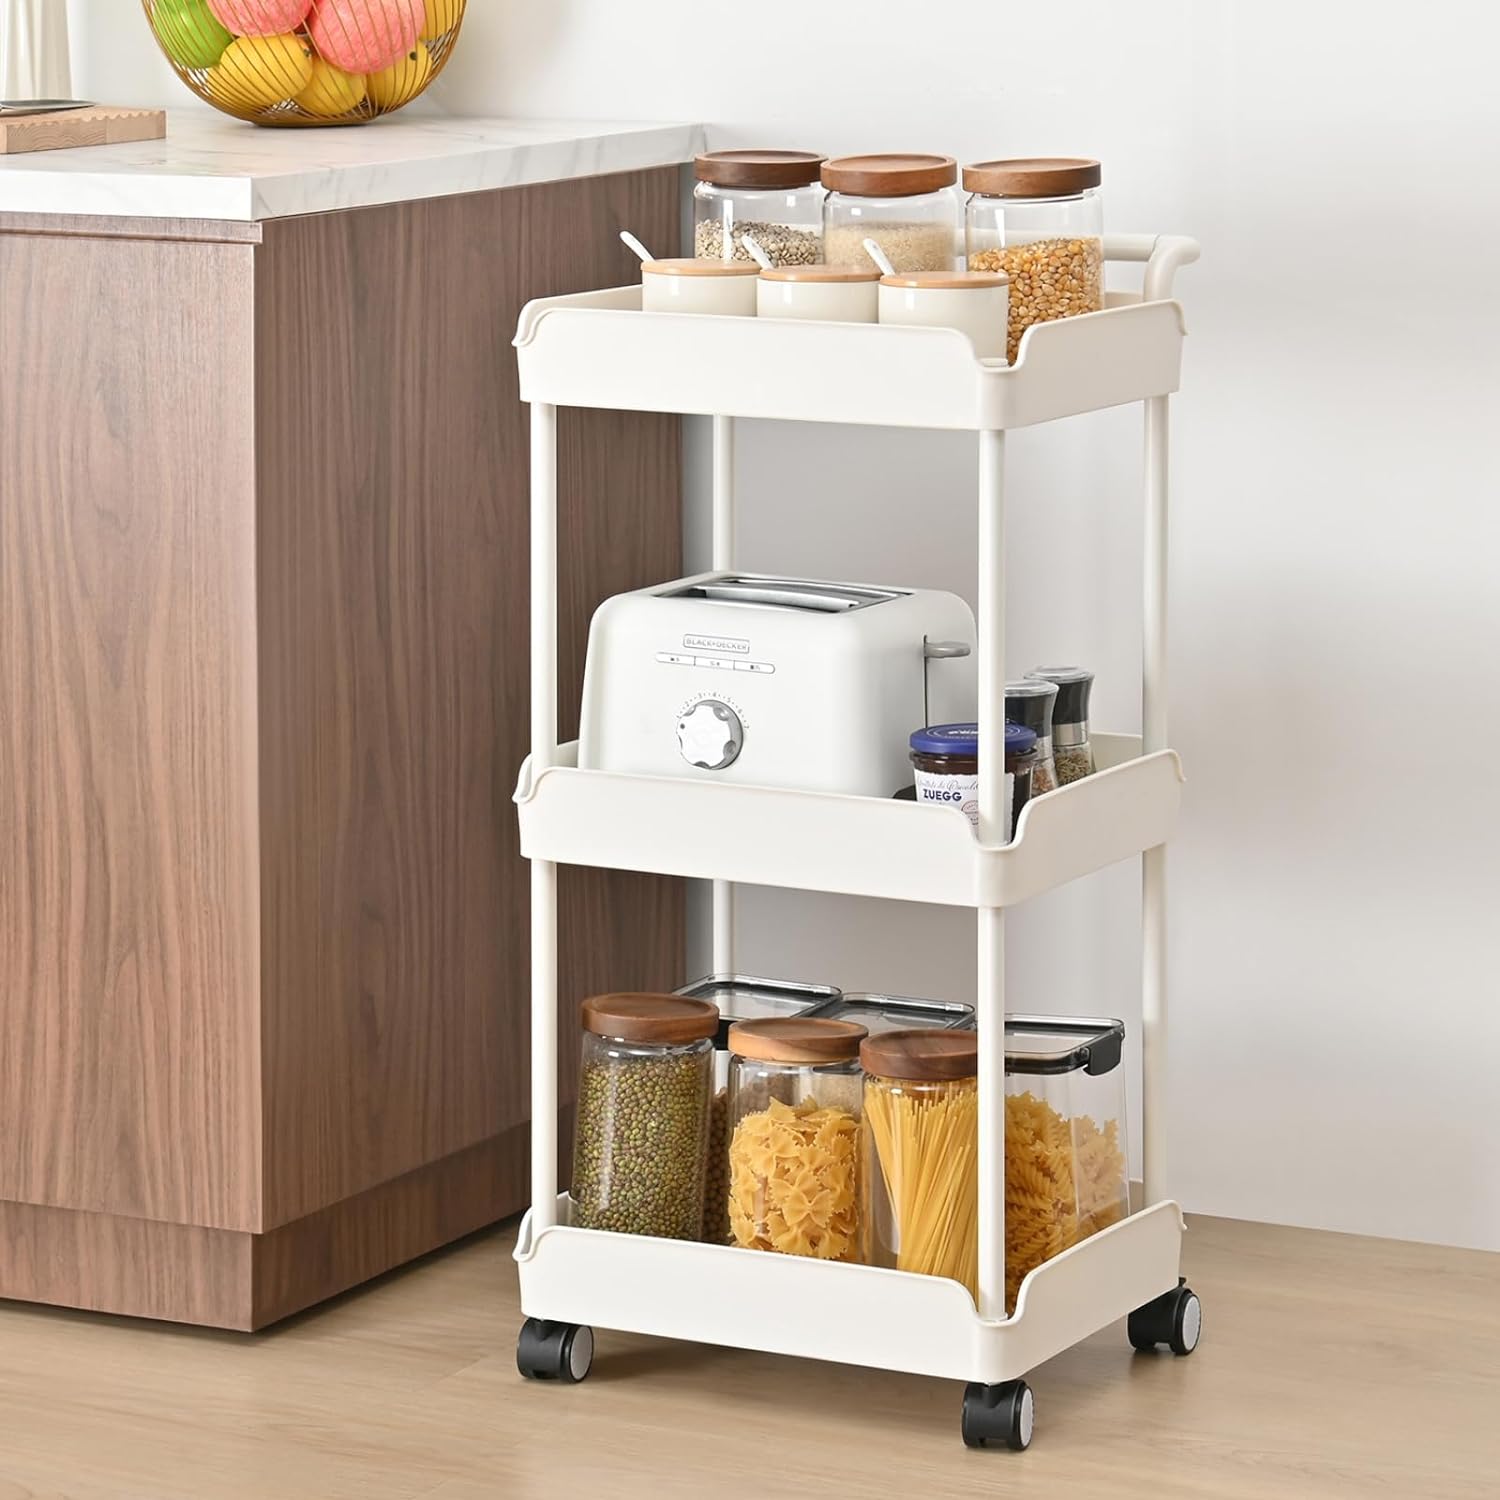 I ordered this rolling storage cart to get my kitchen items organized since I had many items here and there, and it was hard to find them when I needed certain ones. With help from this cart, I can store items on different shelves by categories, and that makes it easy to find my cooking items. I have been using it for a while, and Im satisfied with it.